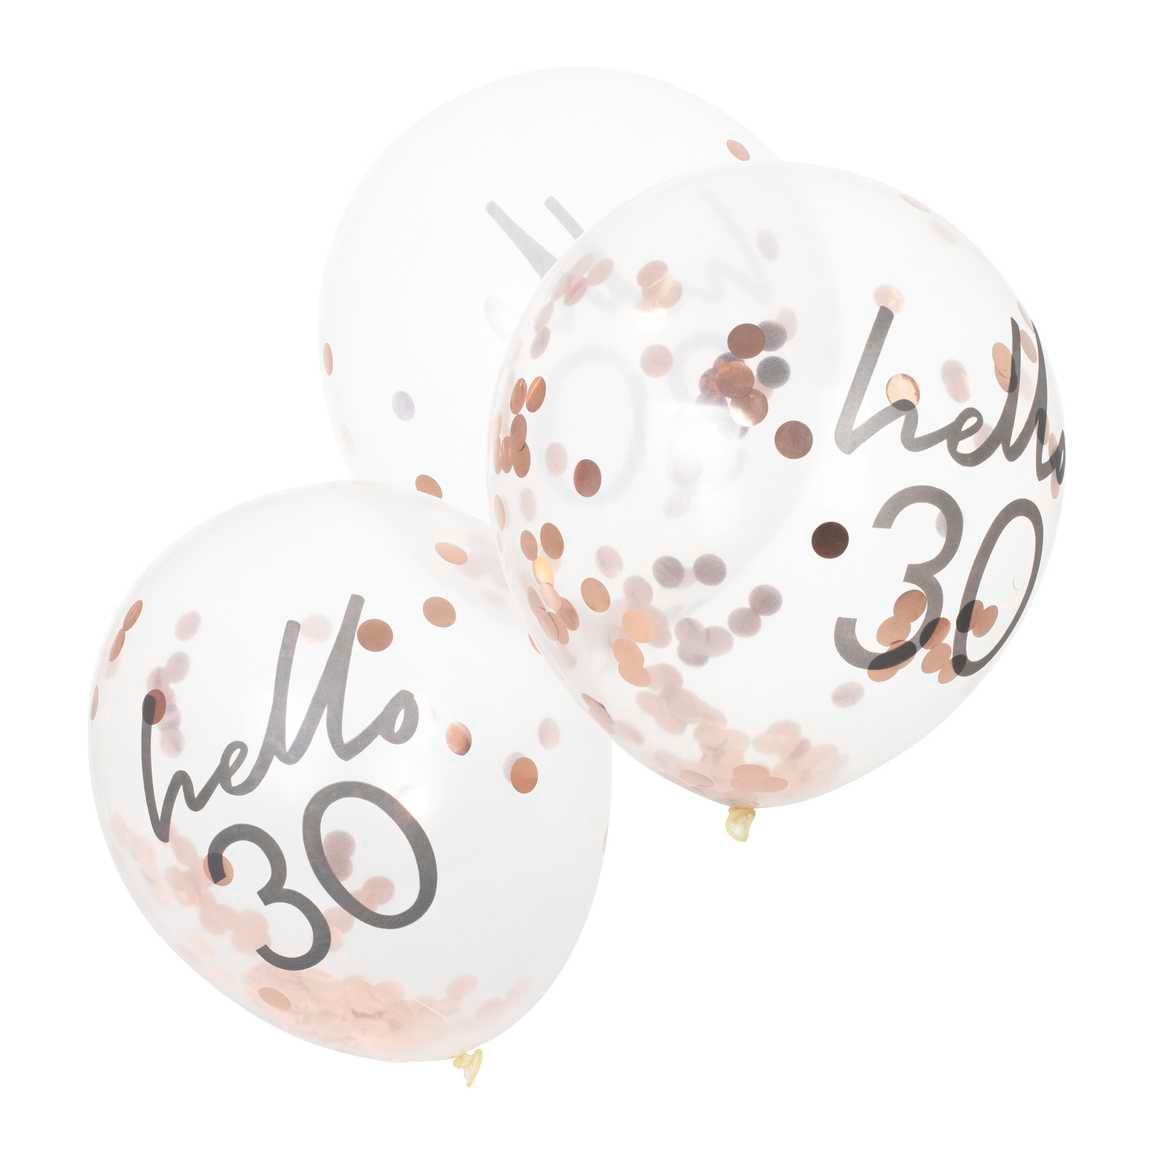 Hello 30 Rose Gold Confetti Balloons 5pk - The Party Room